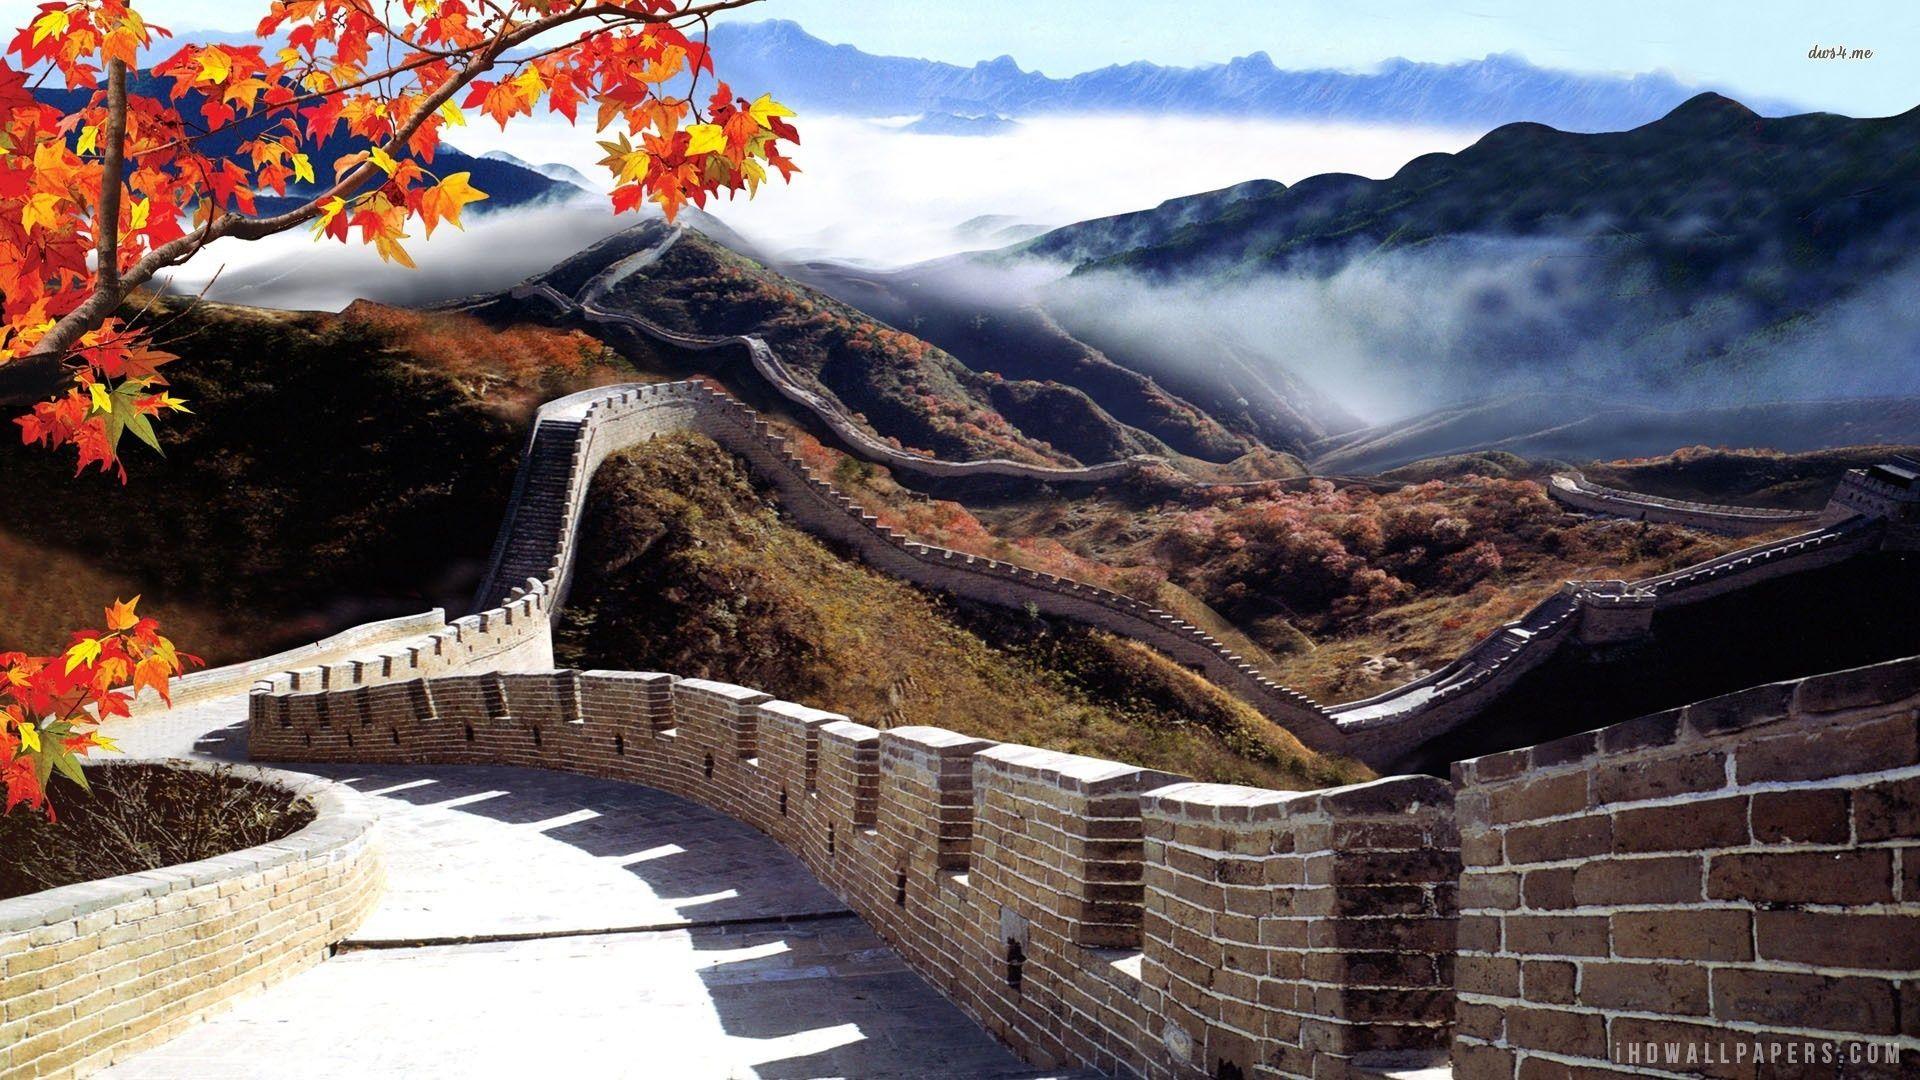 The Great Wall of China 2016 wallpaper. travel and world